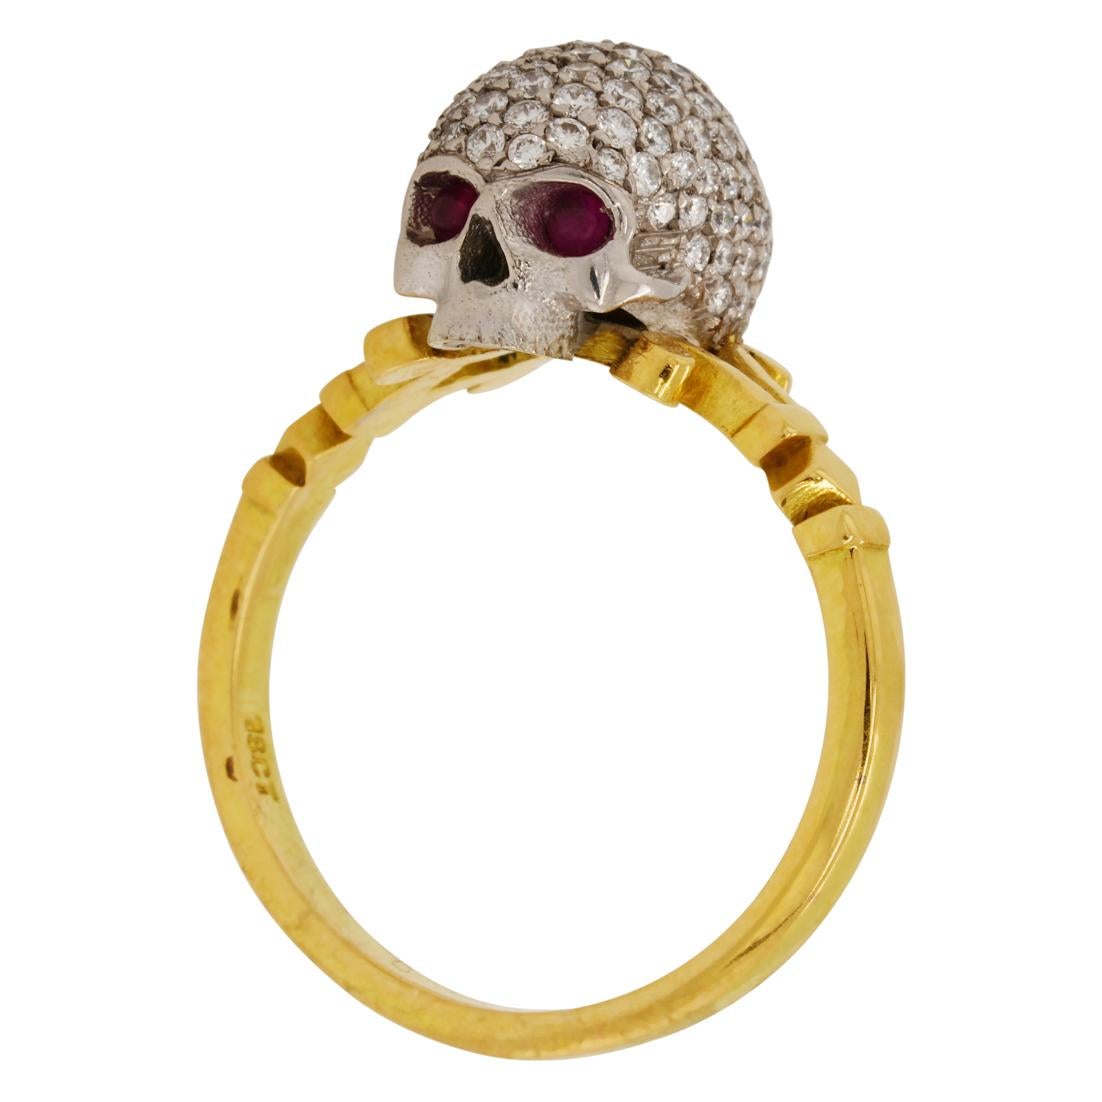 Catacomb Saint Diamond Encrusted Skull Ring in 18kt Gold with Diamonds & Rubies For Sale 2